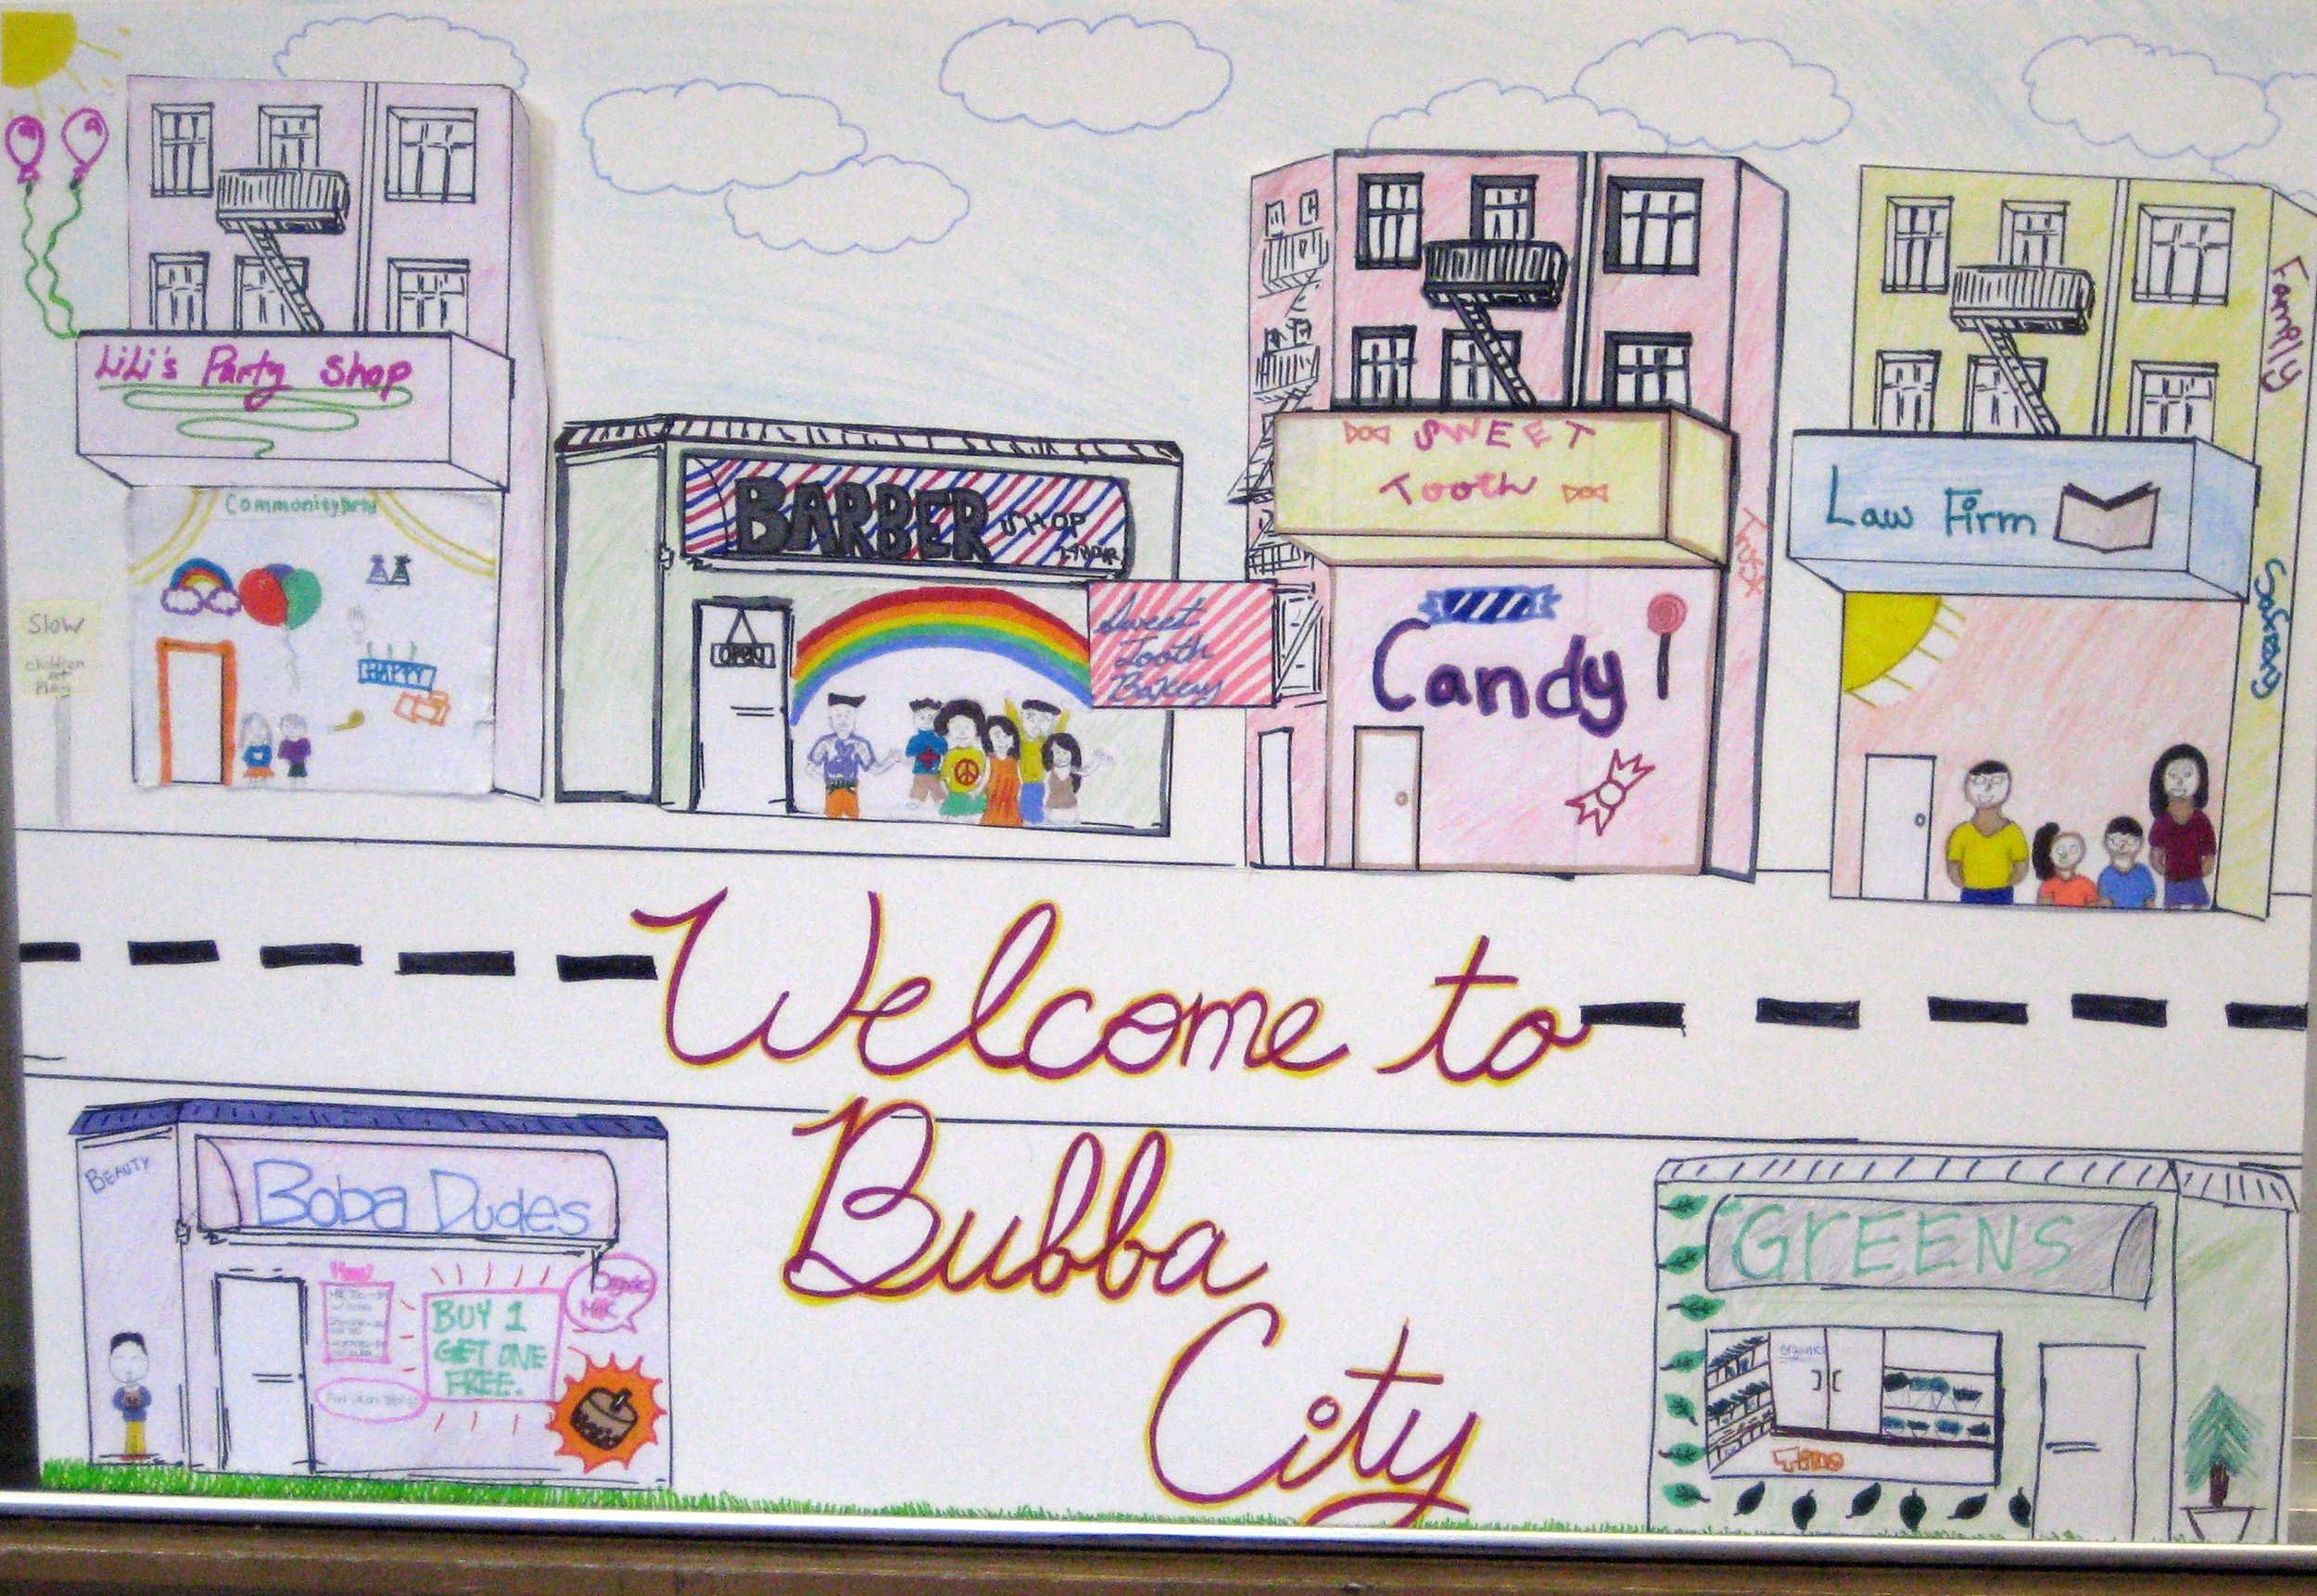 Welcome to Bubba City